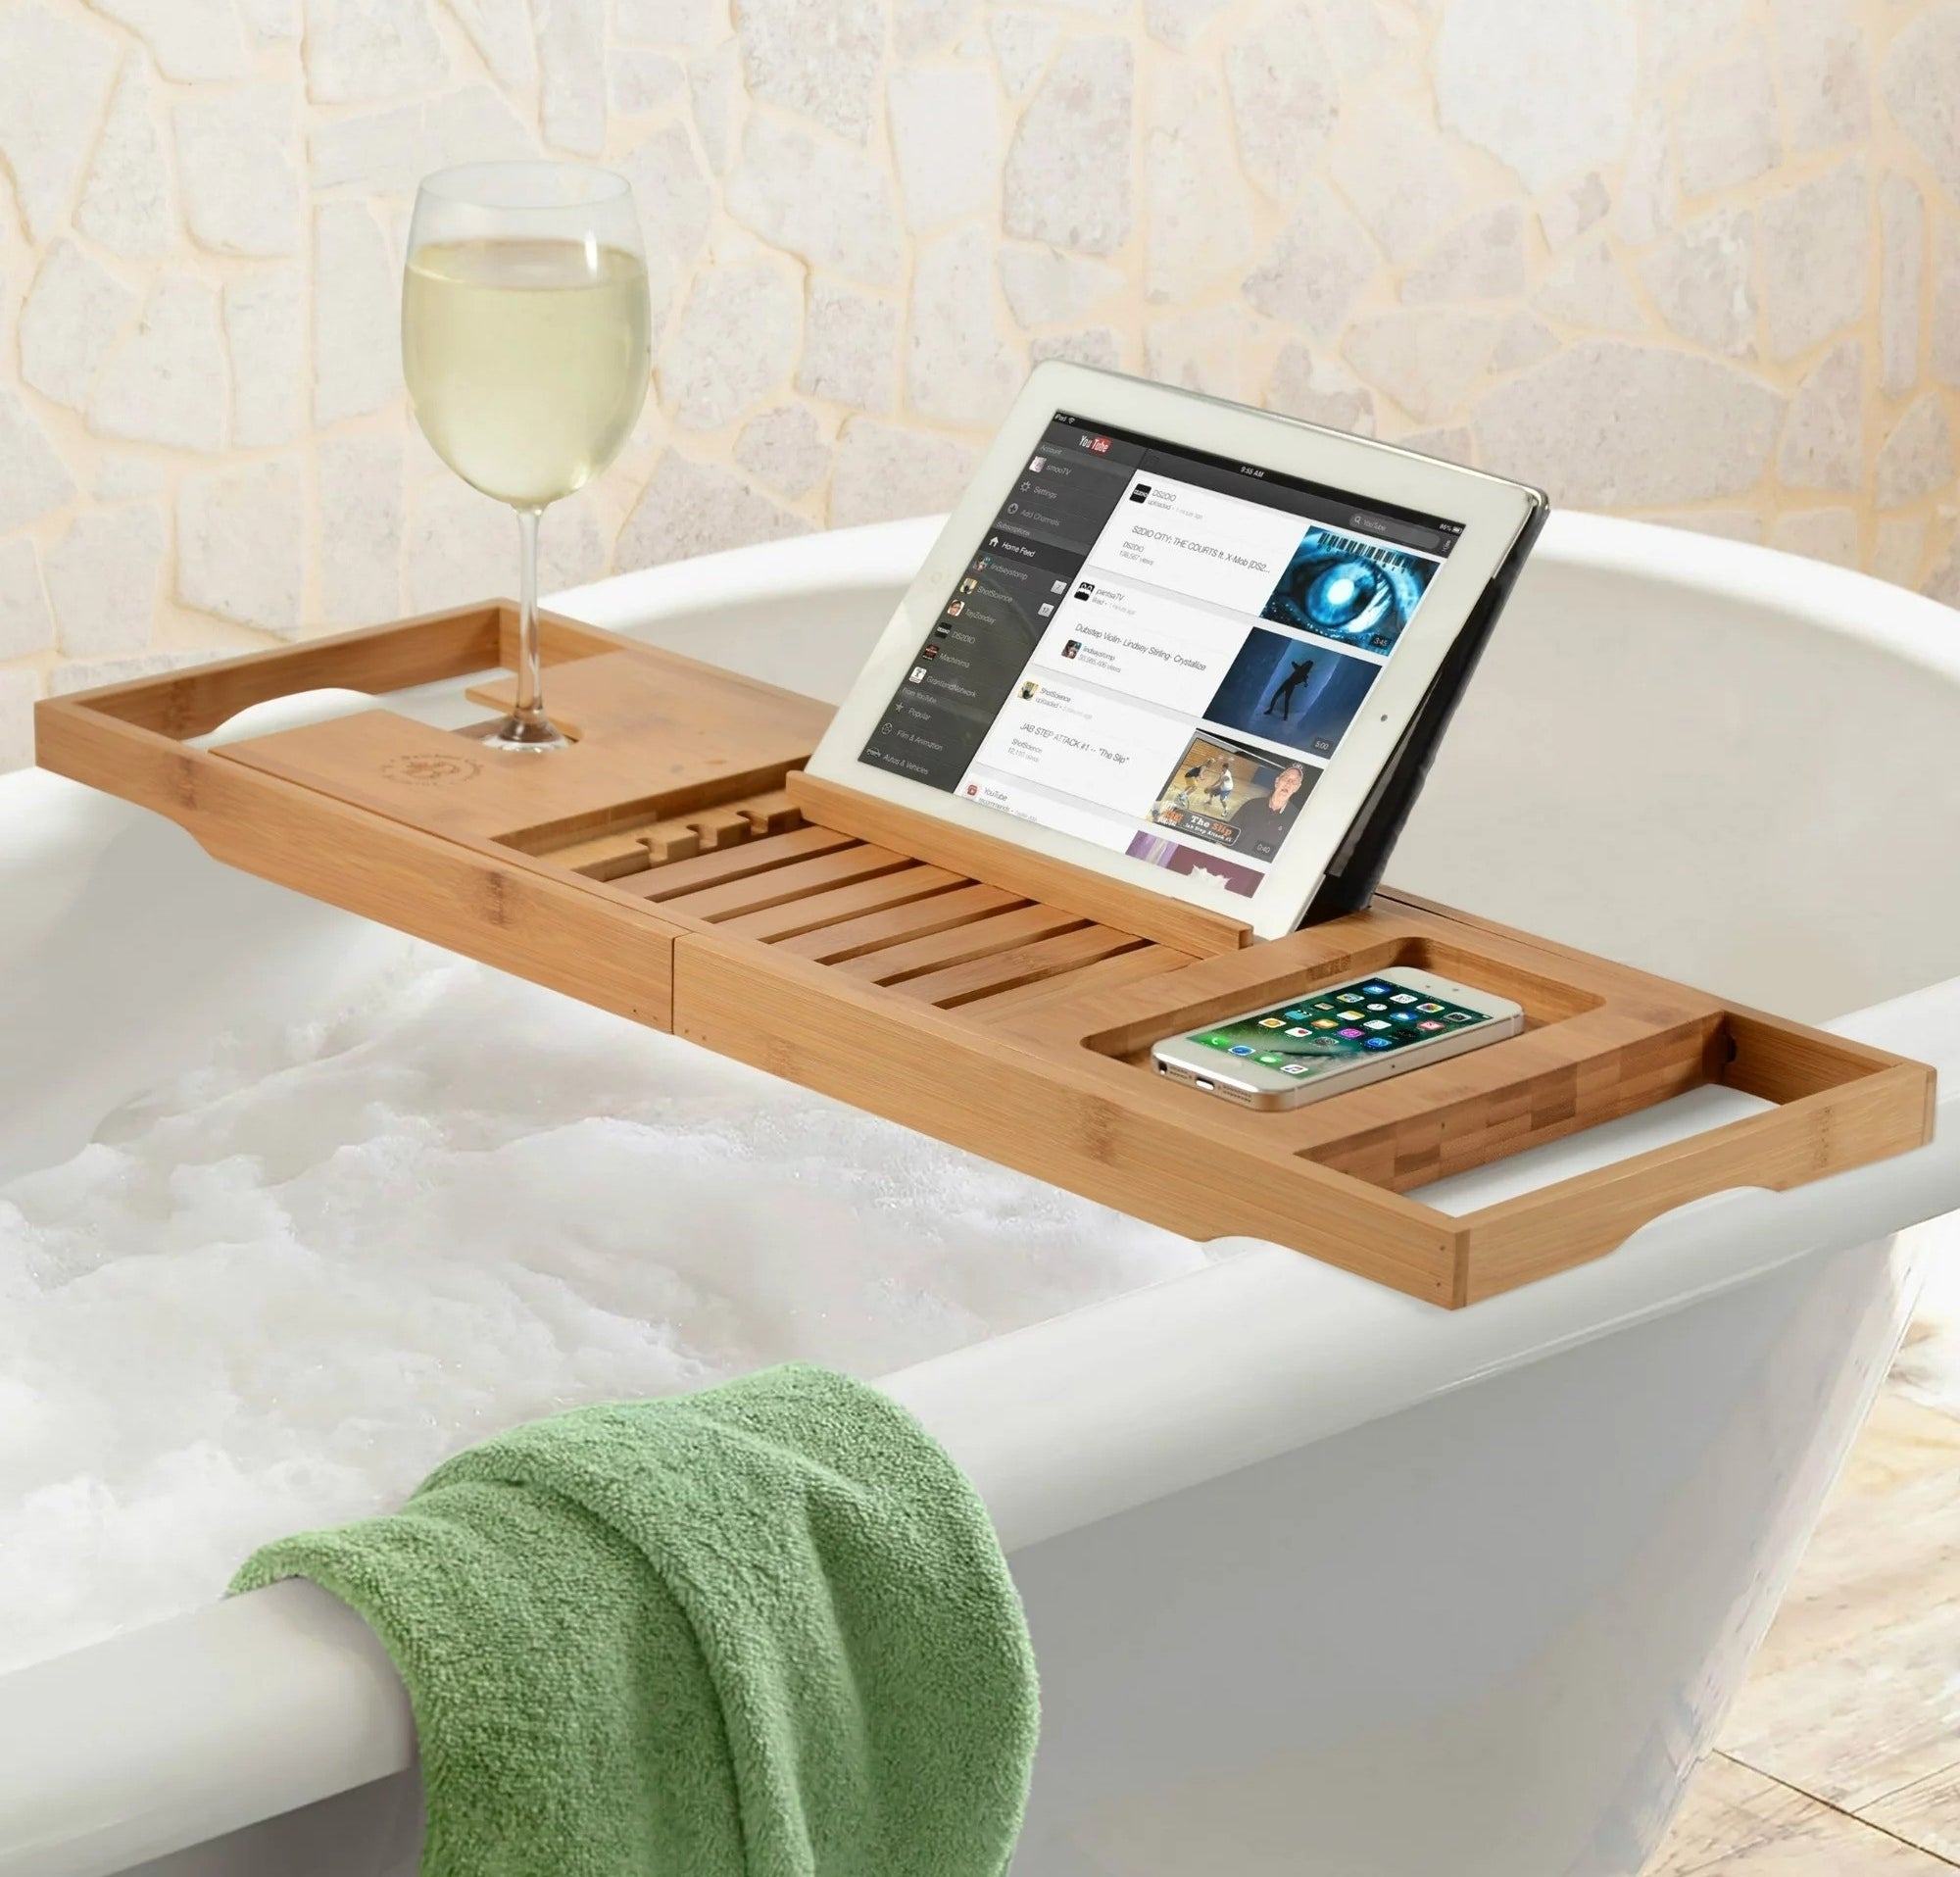 A wooden bath caddy across a bathtub holding a tablet, a phone, and a glass of wine